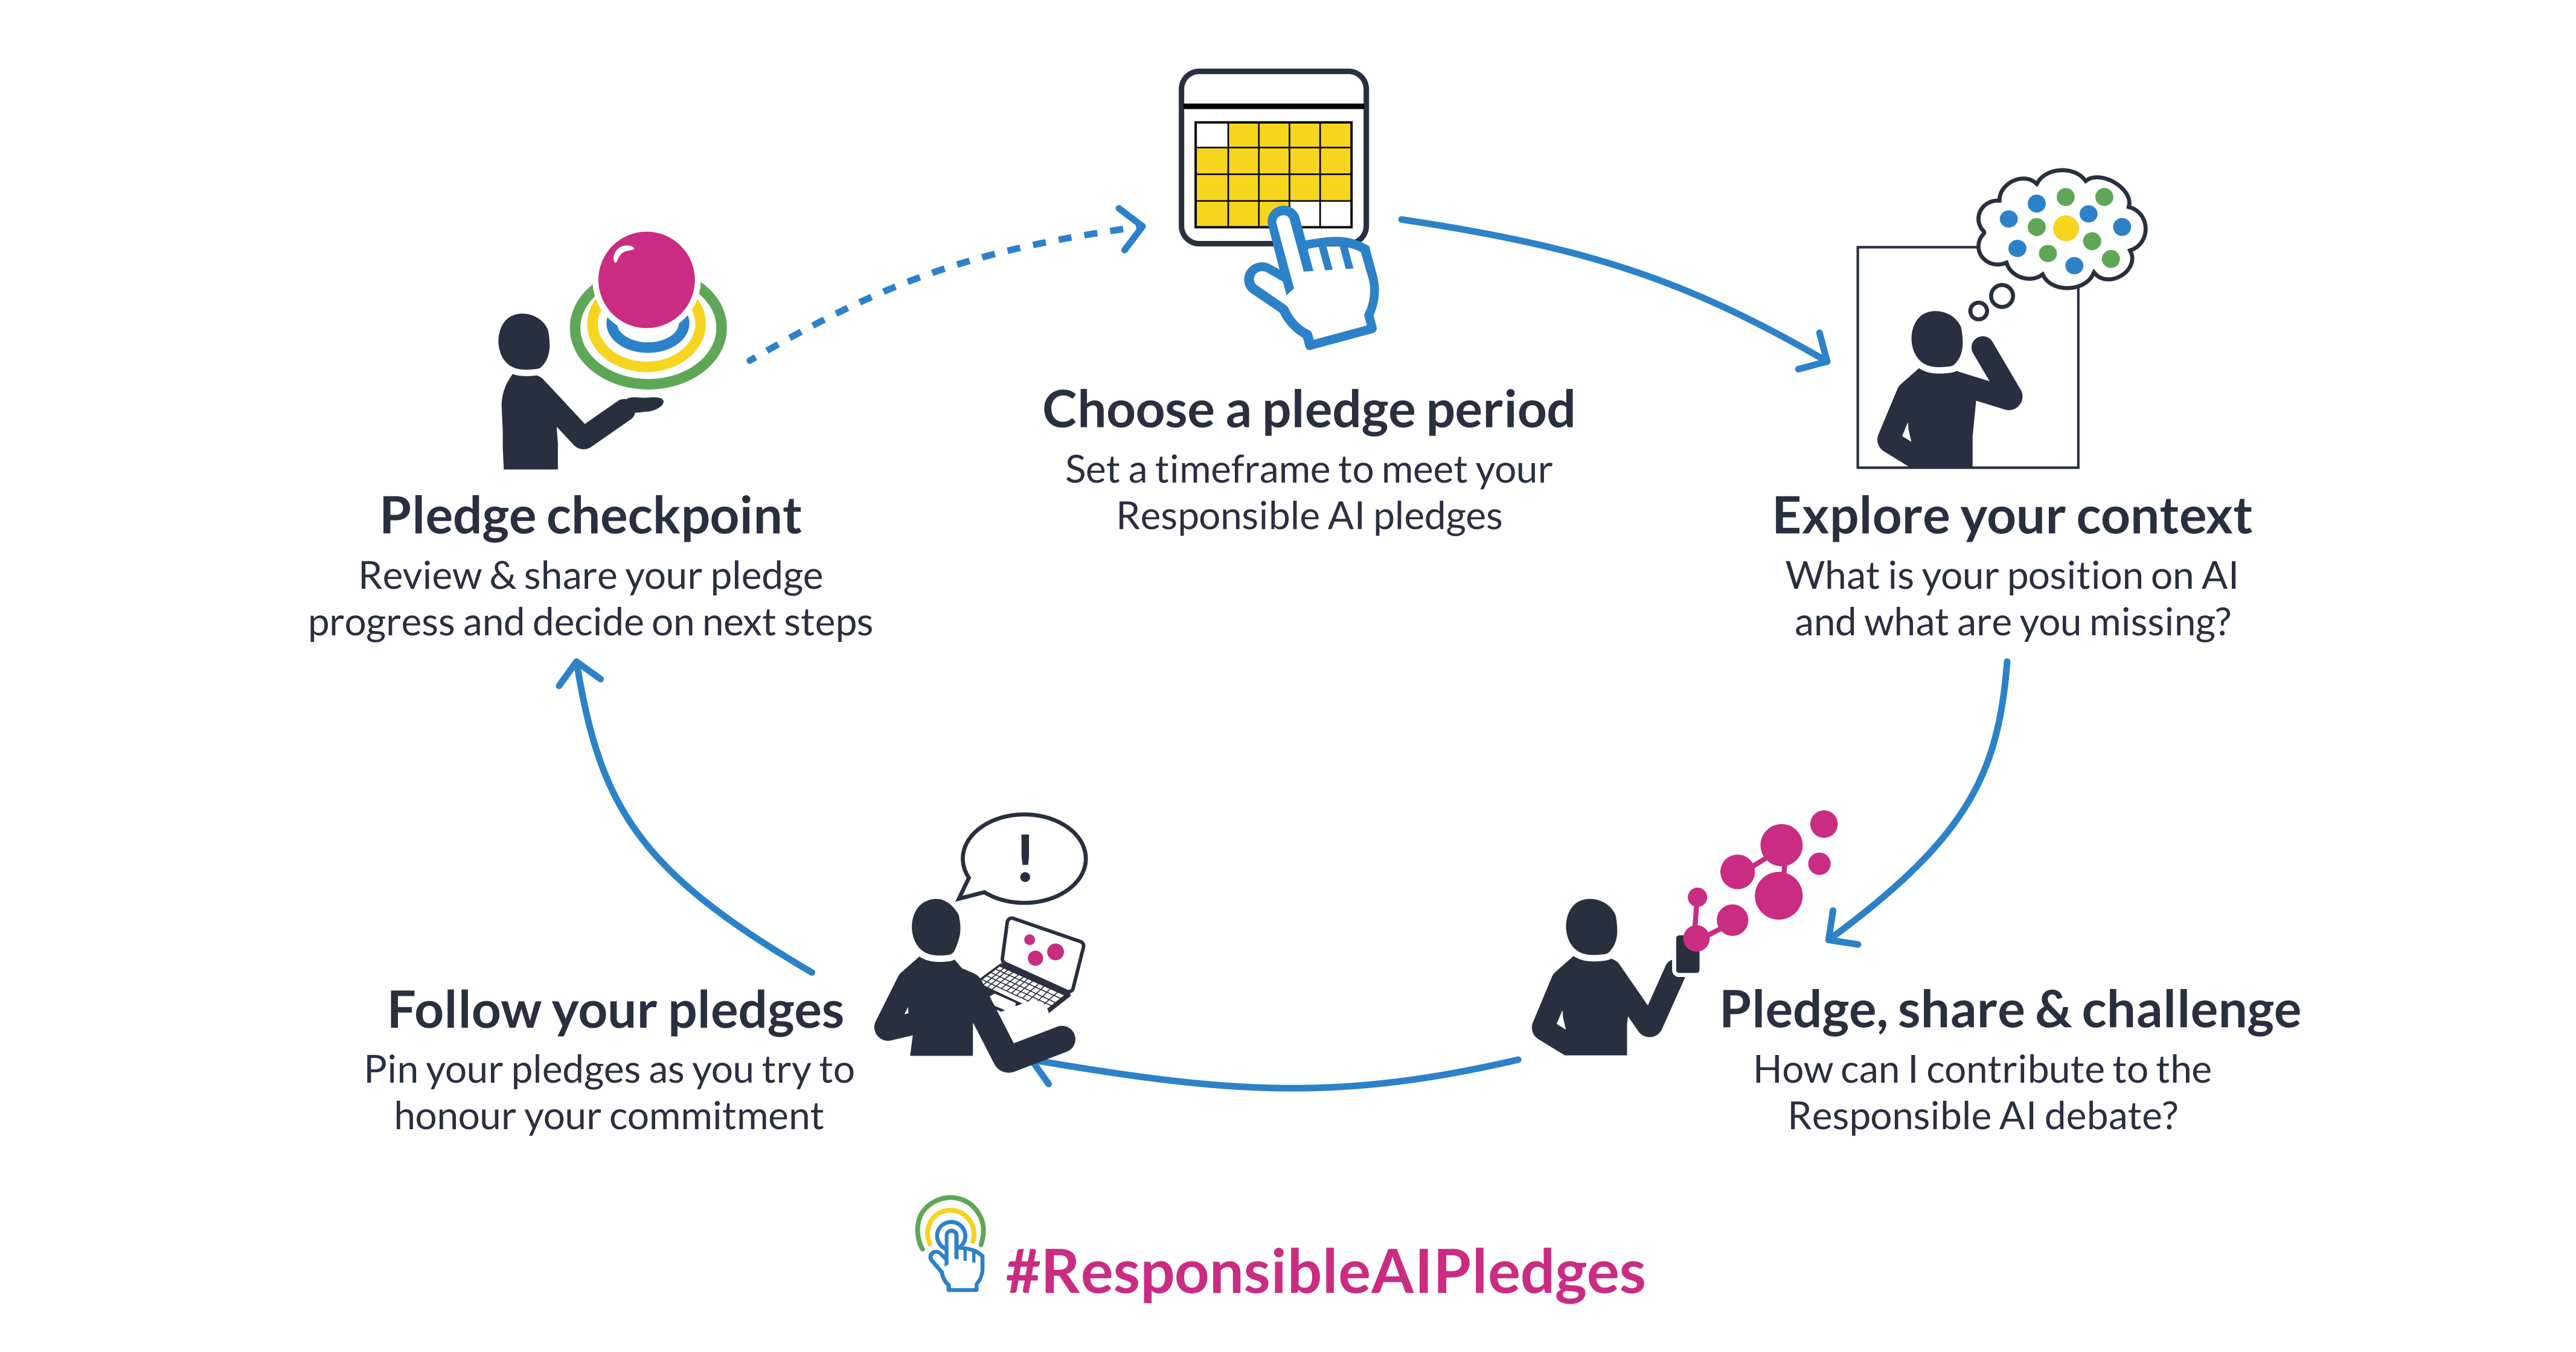 Diagram of the Responsible AI Pledge Challenge iterative cycle. The stages are: 1 Choose a pledge period: Set a timeframe to meet your Responsible Al pledges. 2 Explore your context: What is your position on Al and what are you missing? 3 Pledge, share & challenge: How can I contribute to the Responsible Al debate? 4 Follow your pledges: Pin your pledges as you try to honour your commitment. 5 Pledge checkpoint: Review & share your pledge progress and decide on next steps.